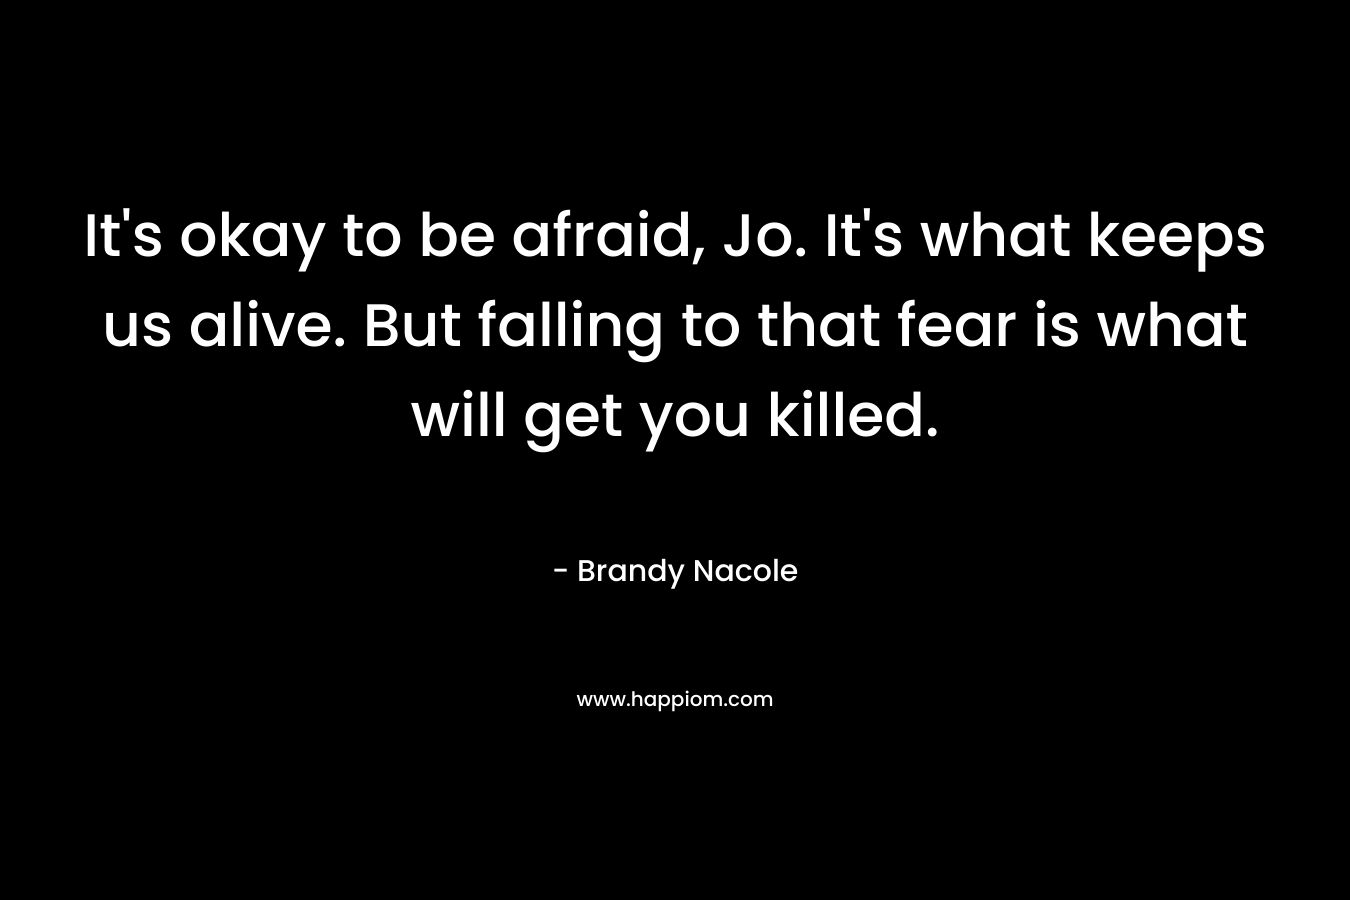 It’s okay to be afraid, Jo. It’s what keeps us alive. But falling to that fear is what will get you killed. – Brandy Nacole